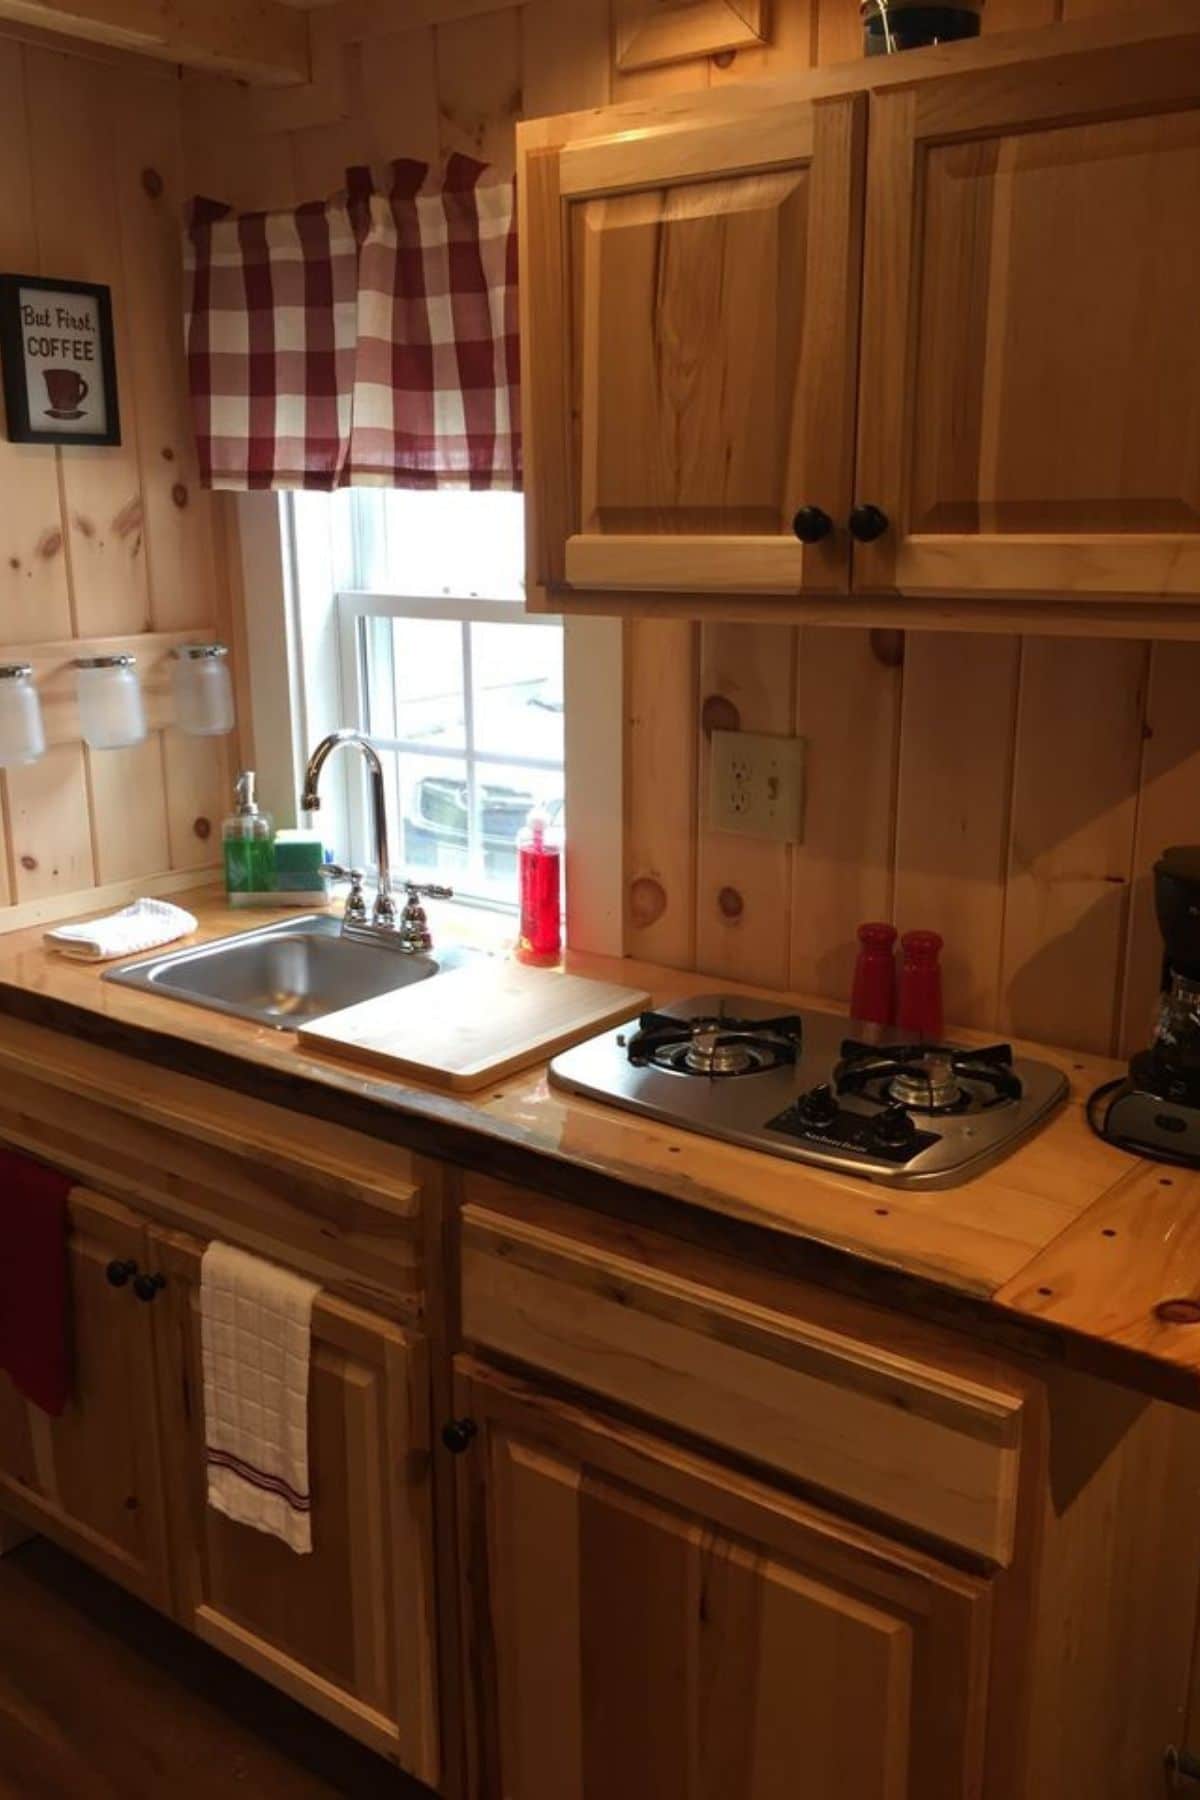 wood cabinets in kitchen with checked curtain on window above sink